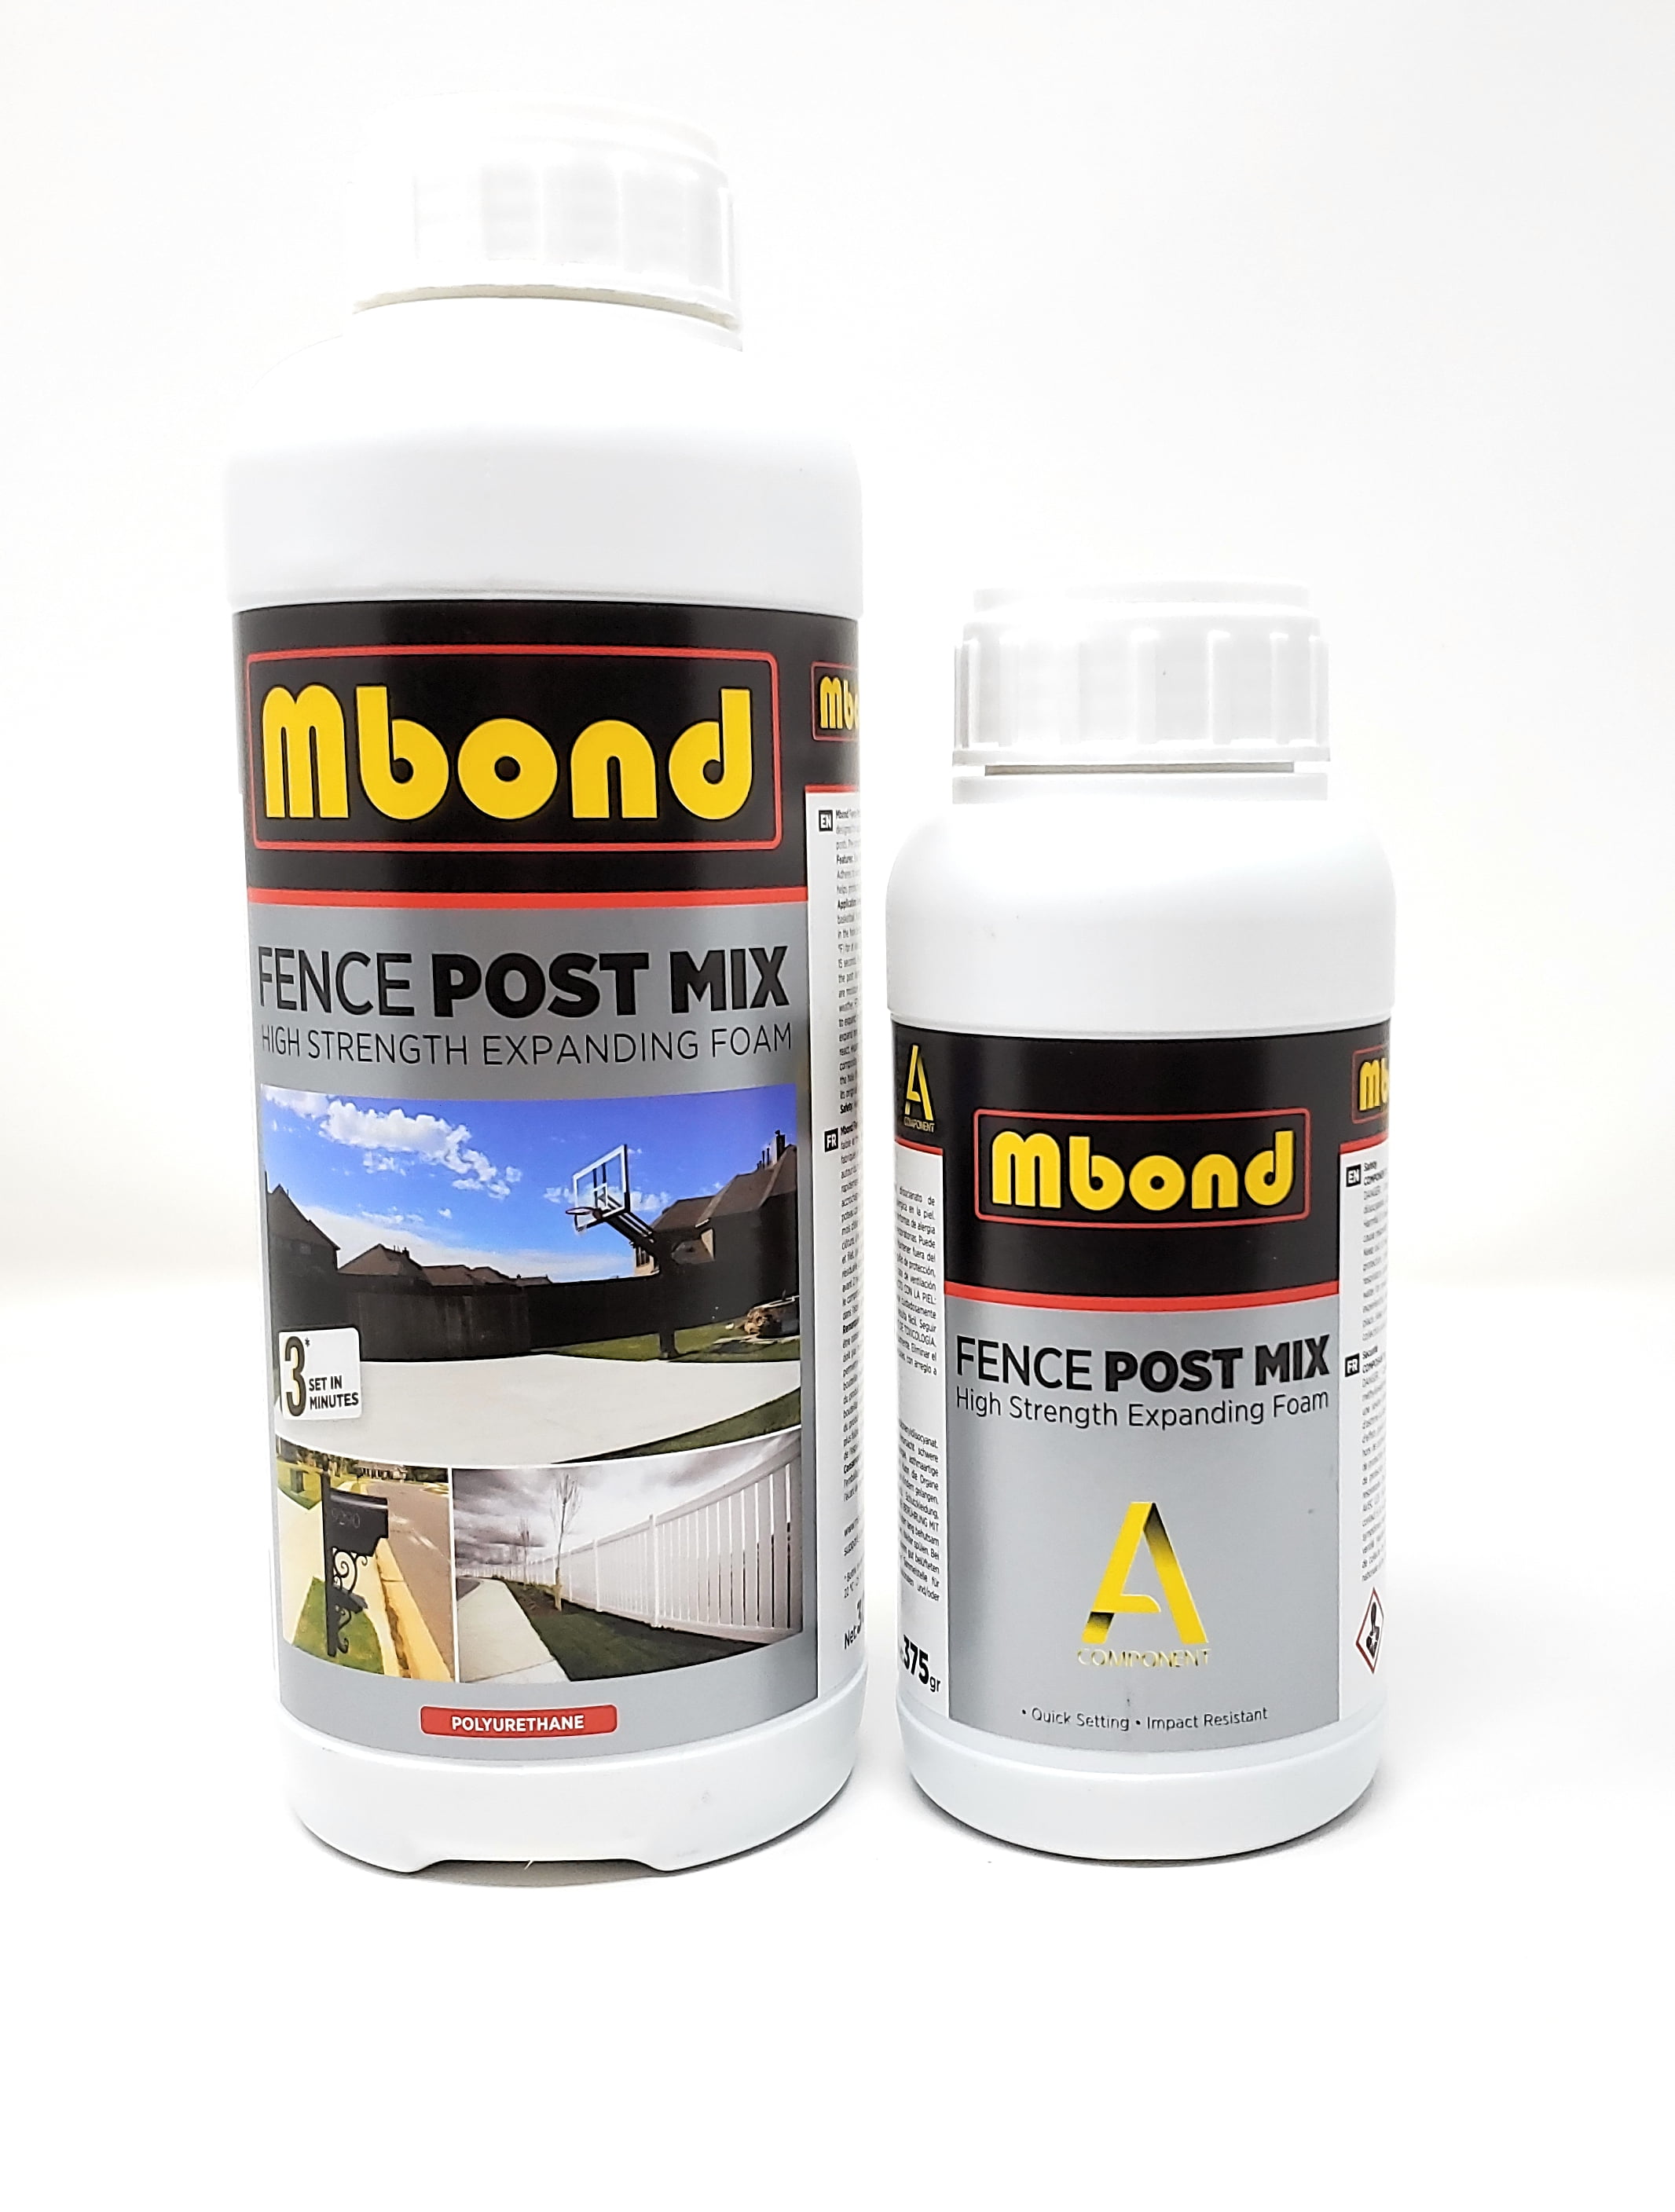 No Tools Required Postloc Post Setting Expanding Foam 2-Post Kit Easy-to-Use Concrete Alternative